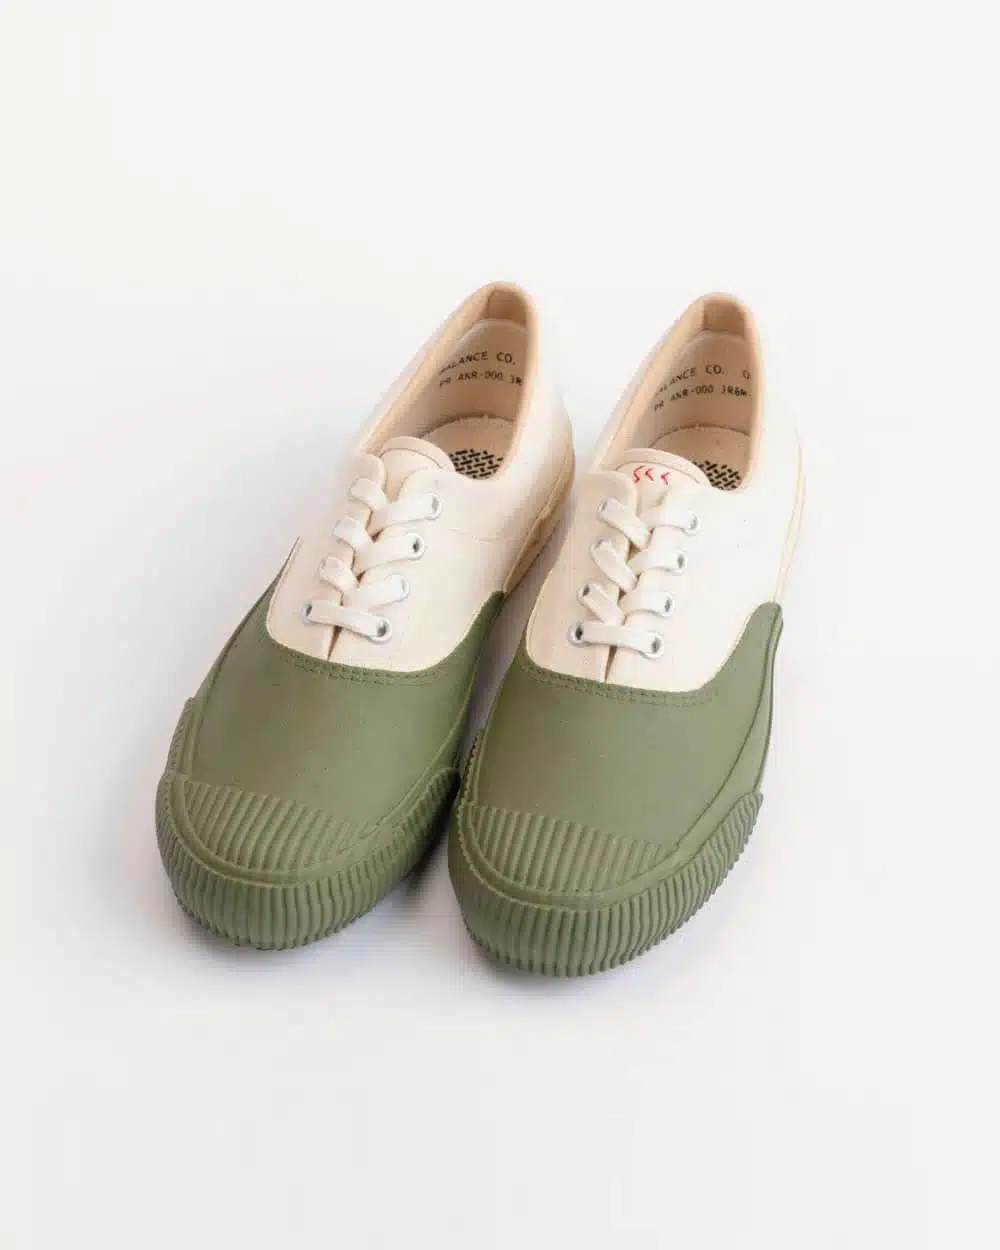 PRAS Shellcap Deck Sneakers Hand Painted Olive · Those That Know